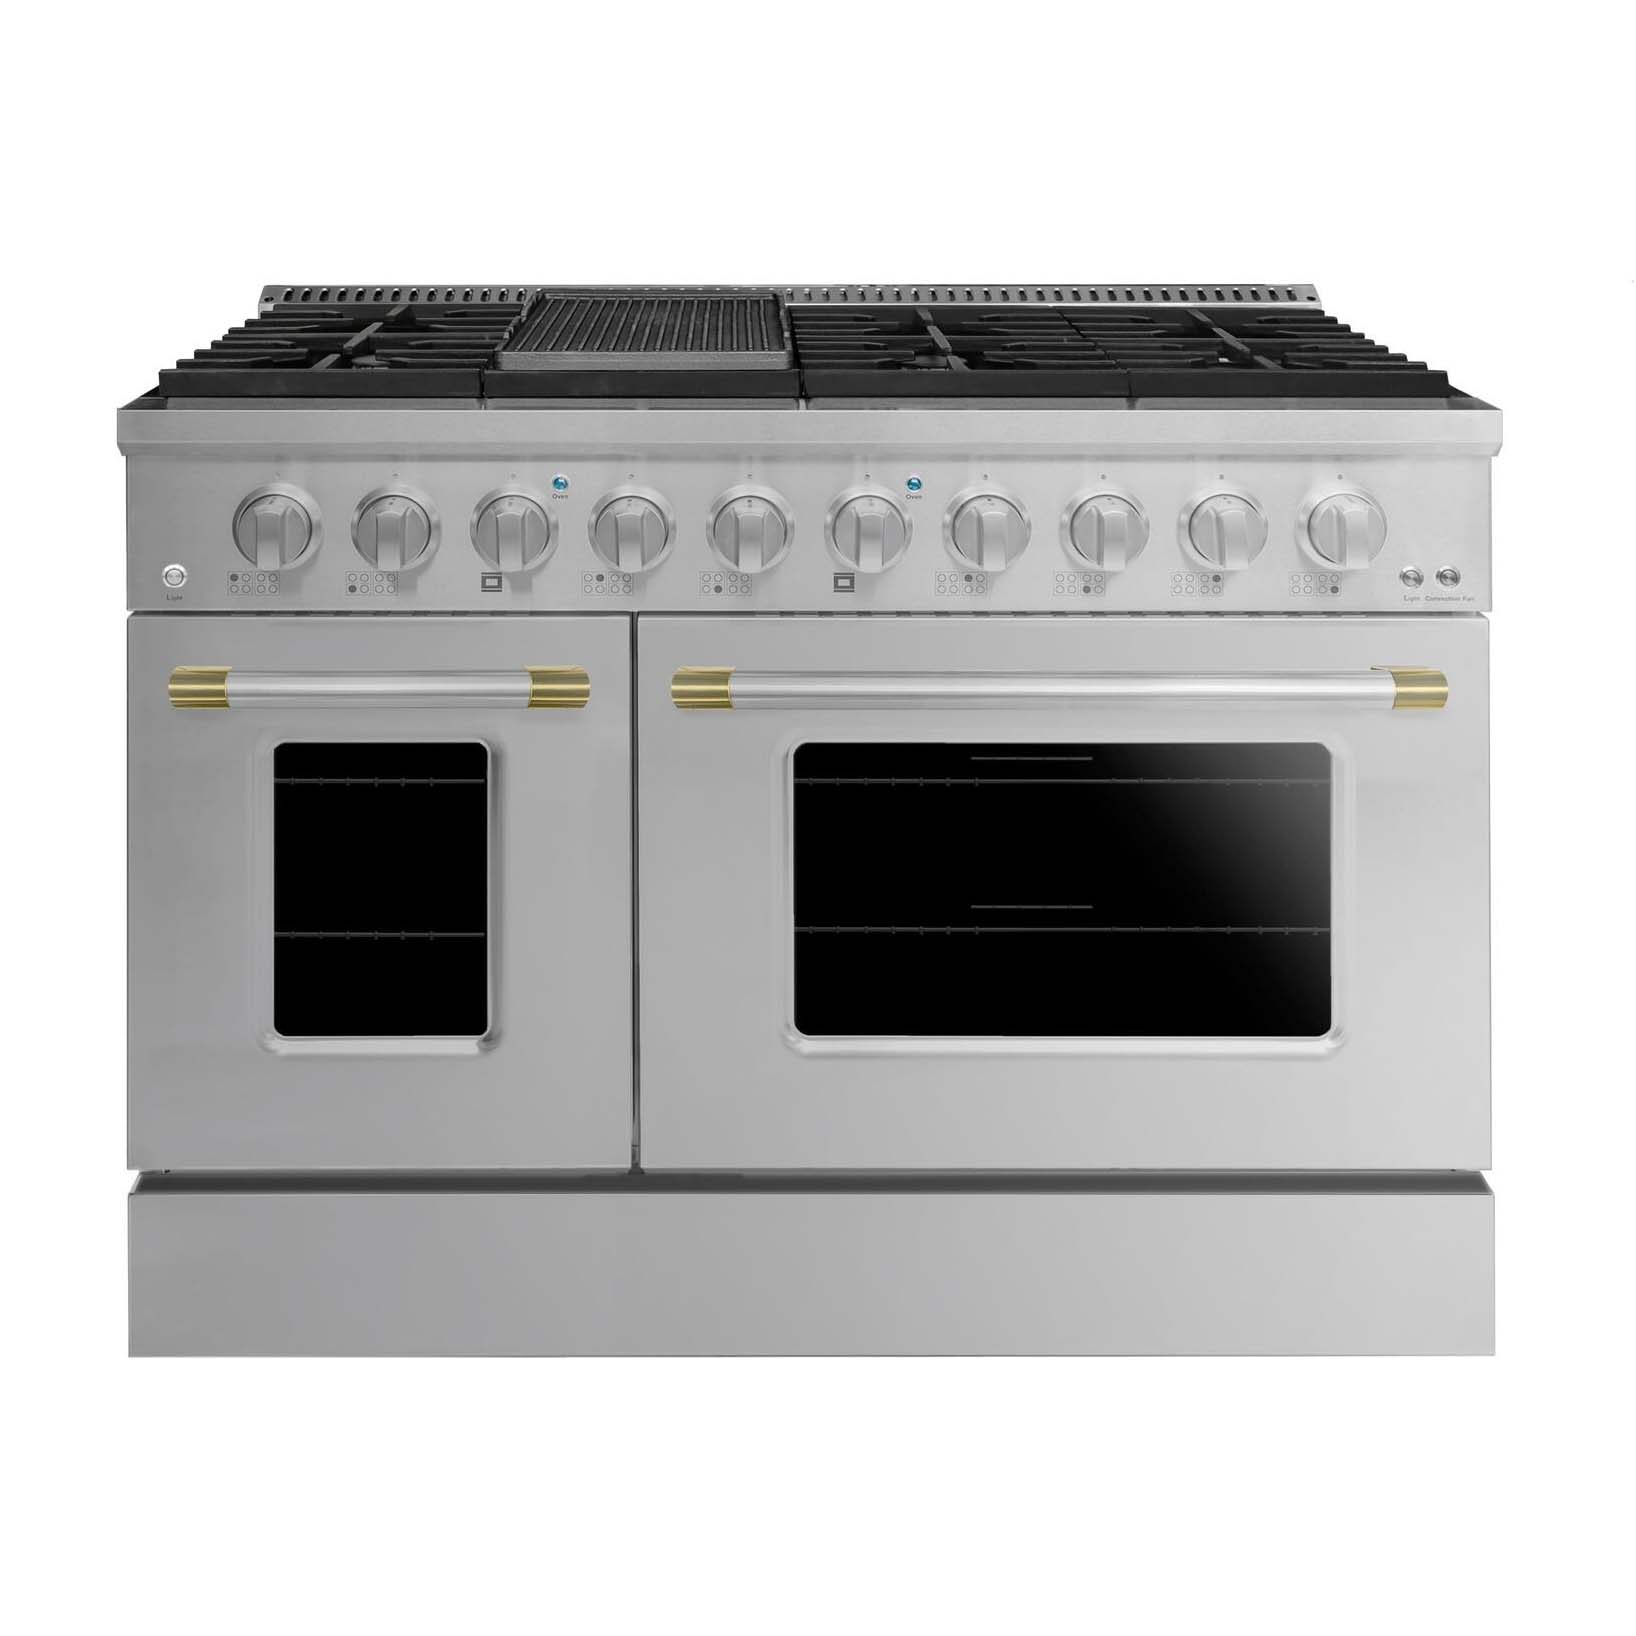 Forté 48 in. 5.53 cu. ft. Freestanding All Gas Range in Stainless Steel front